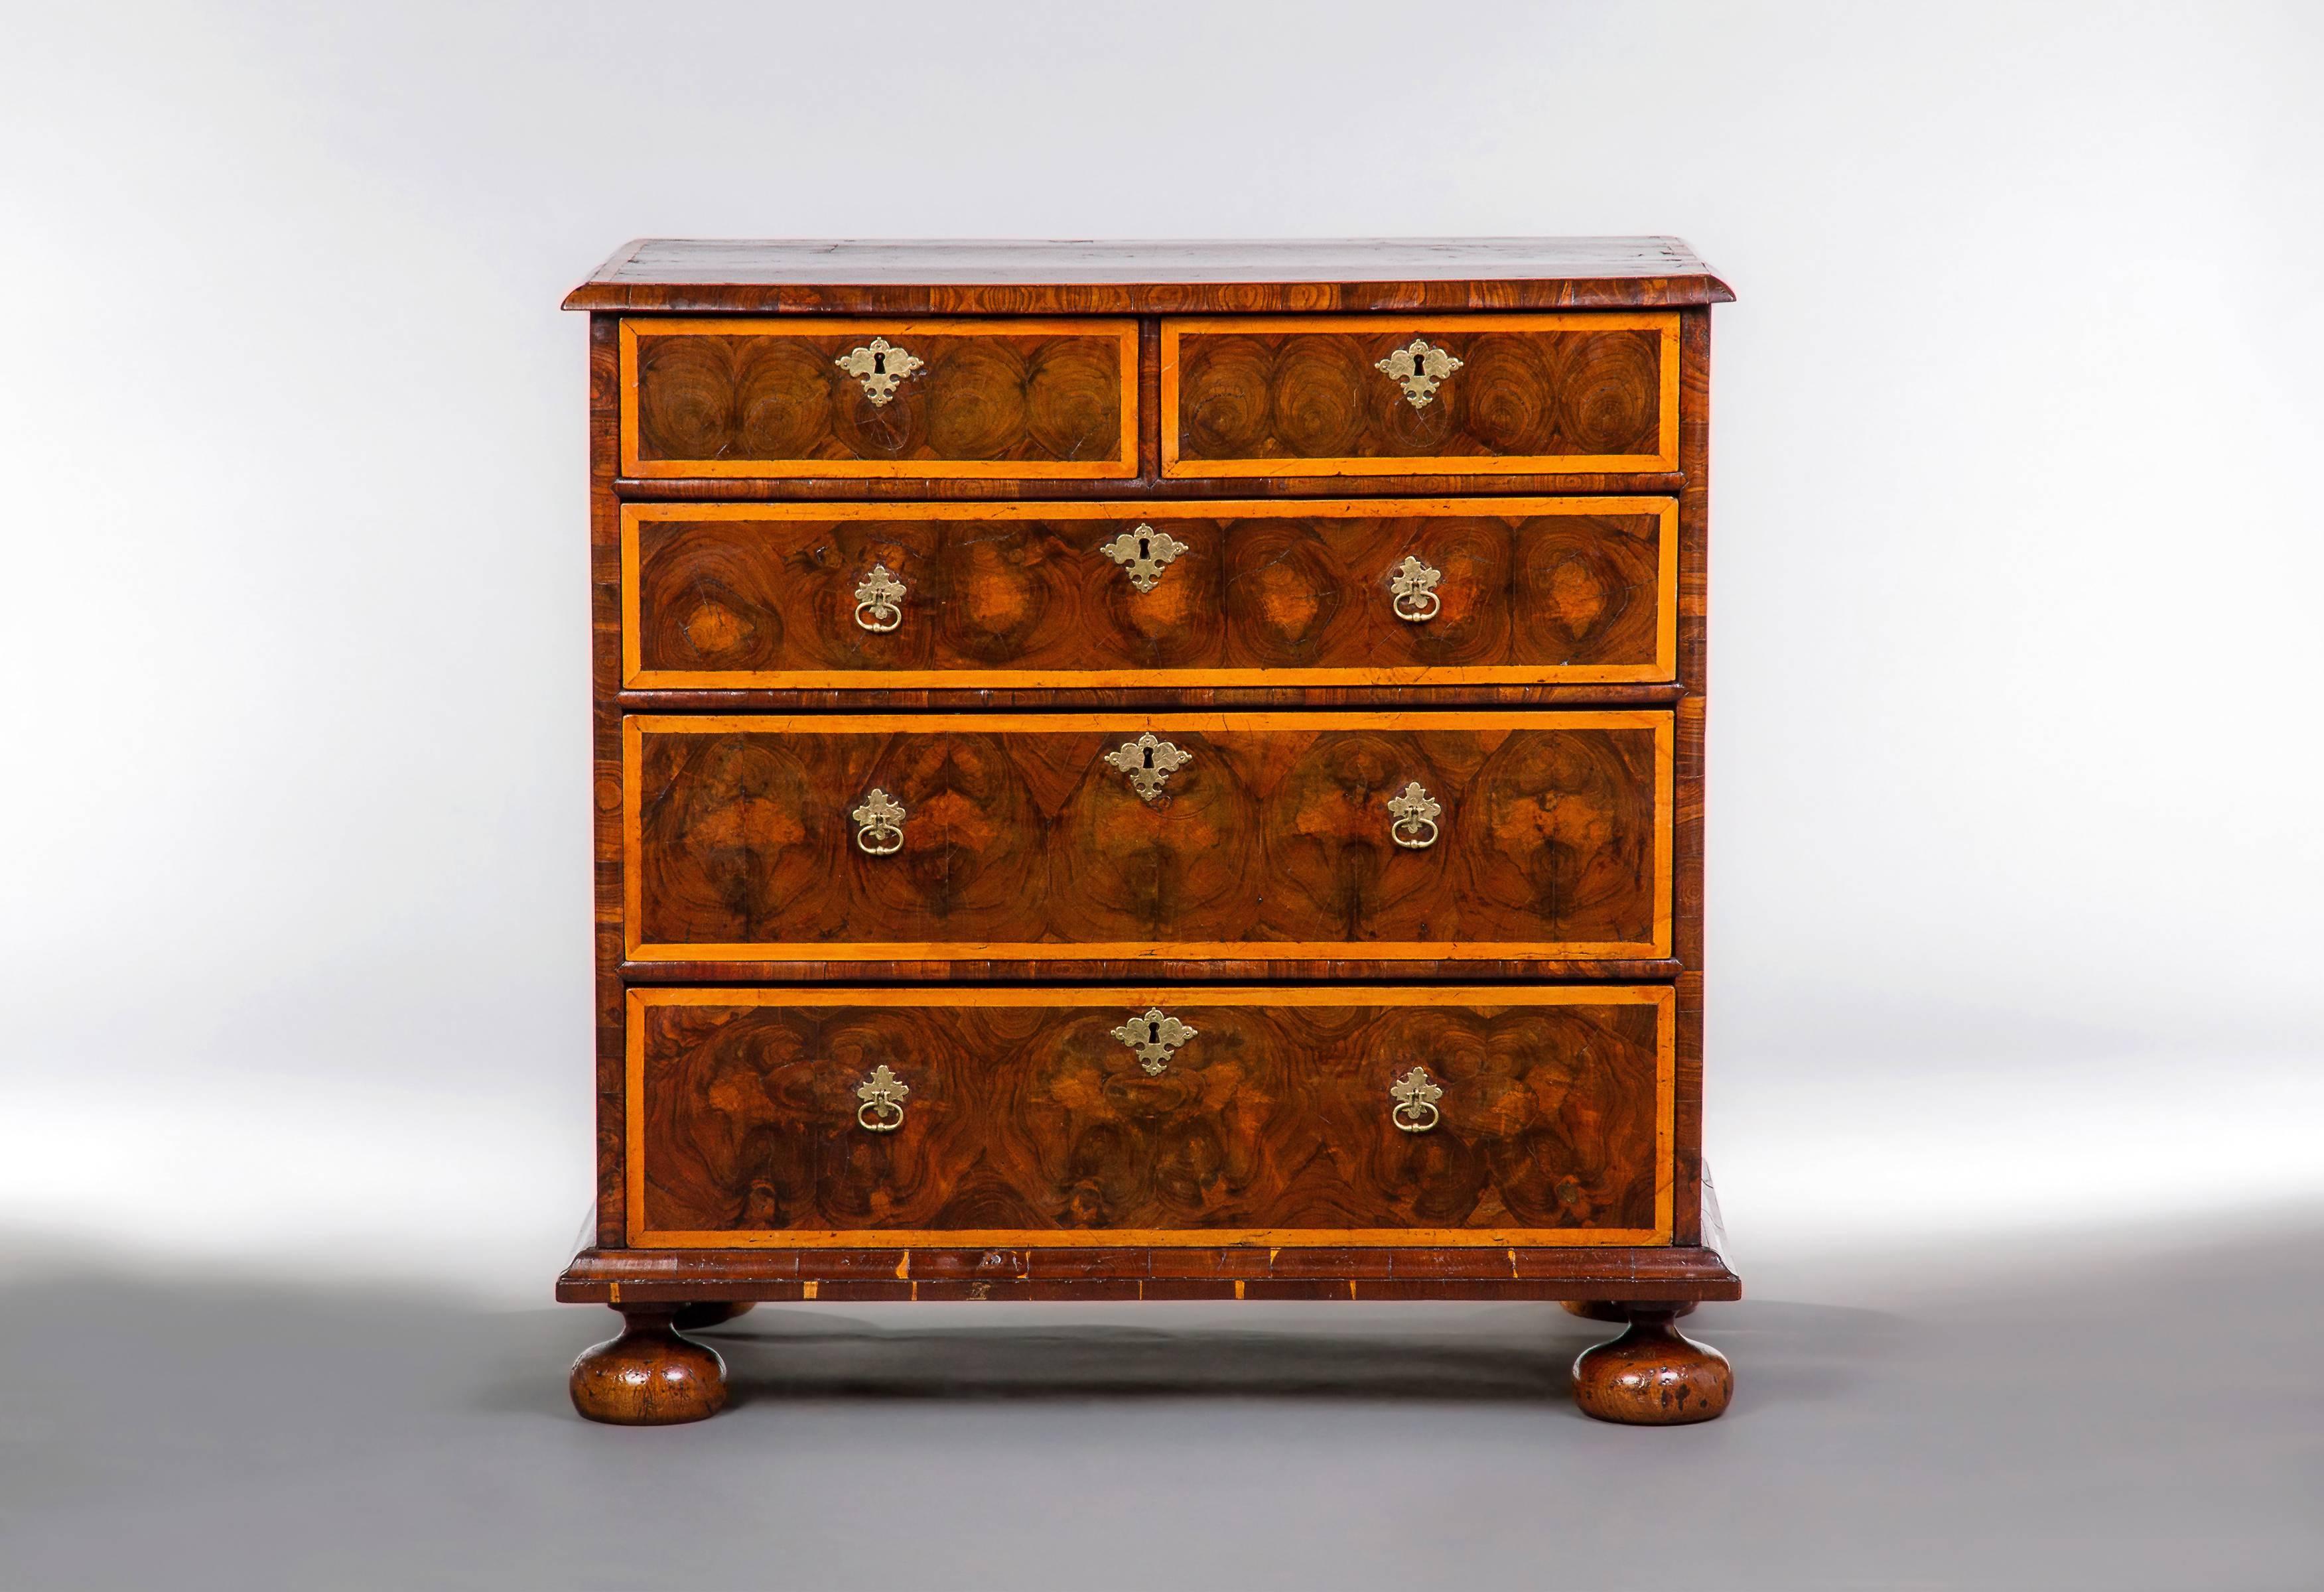 The oyster veneers in olive wood with line inlay and banding in Hollywood, the lower molding in cocus wood, with two short and three long drawers all raised on turned bun feet. The decoration to this chest is in superb condition and the arrangement